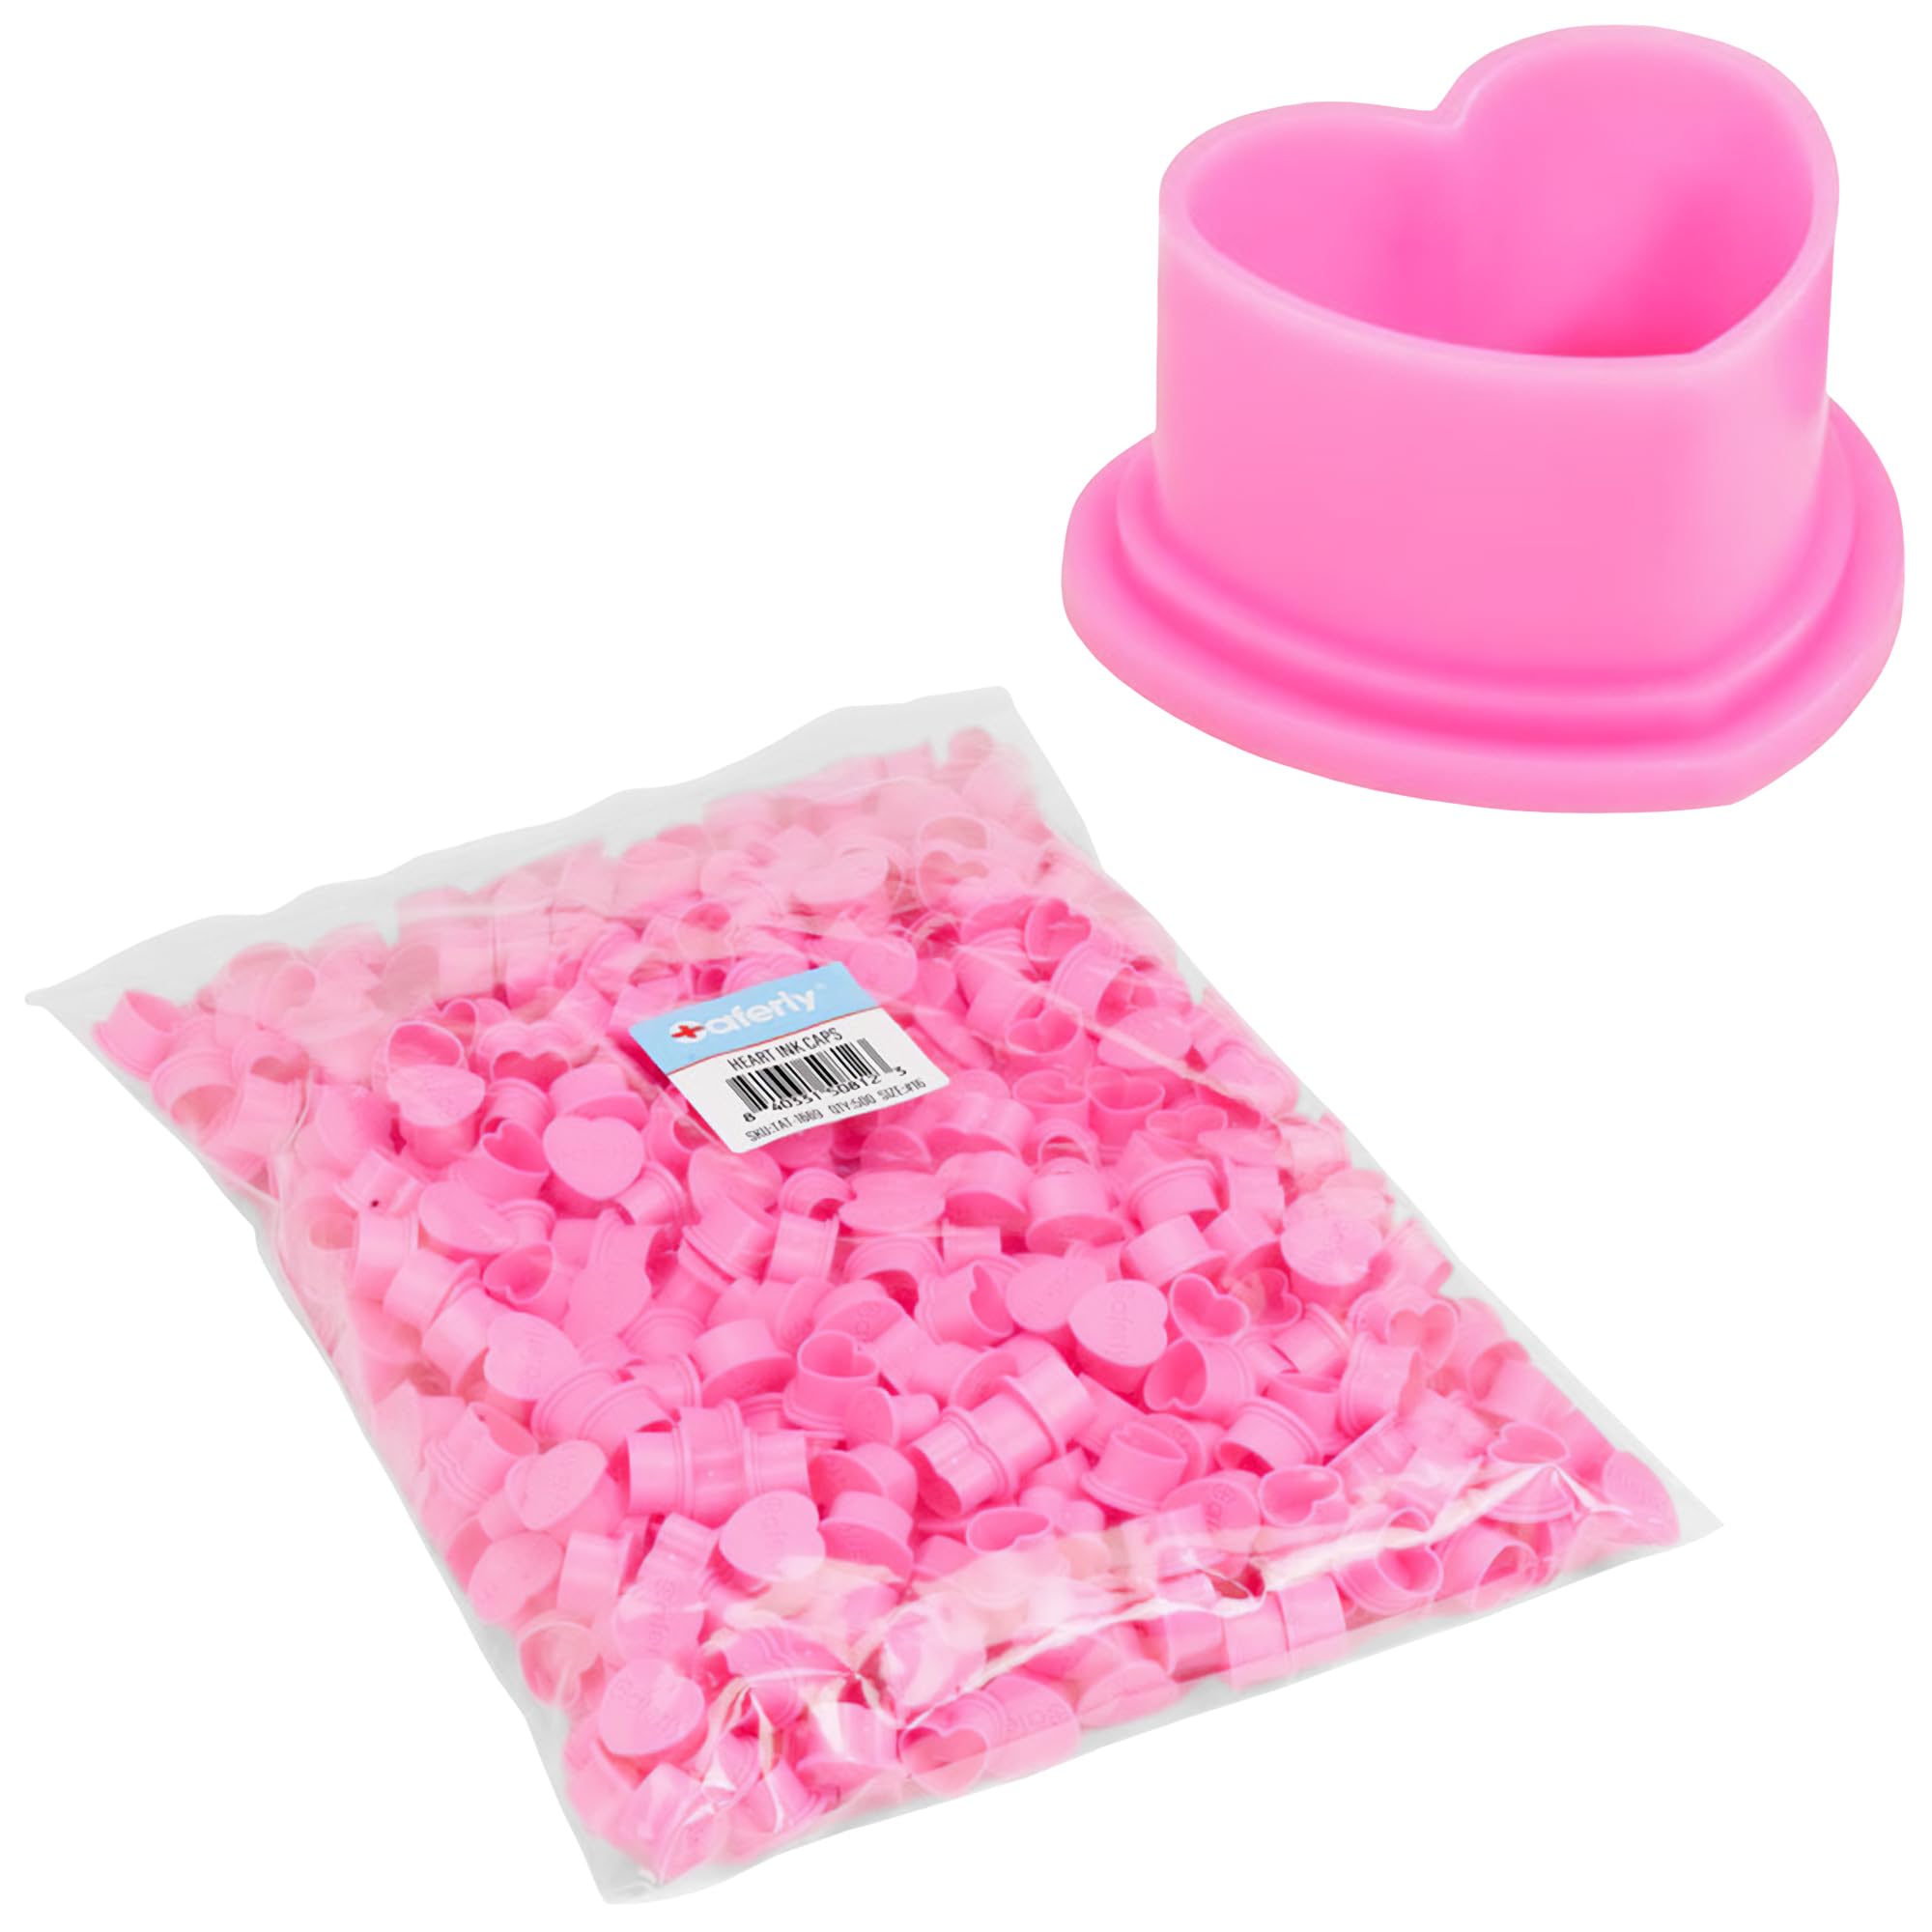 Saferly Heart Large Pink Tattoo Ink Caps Base Attached - 500pcs